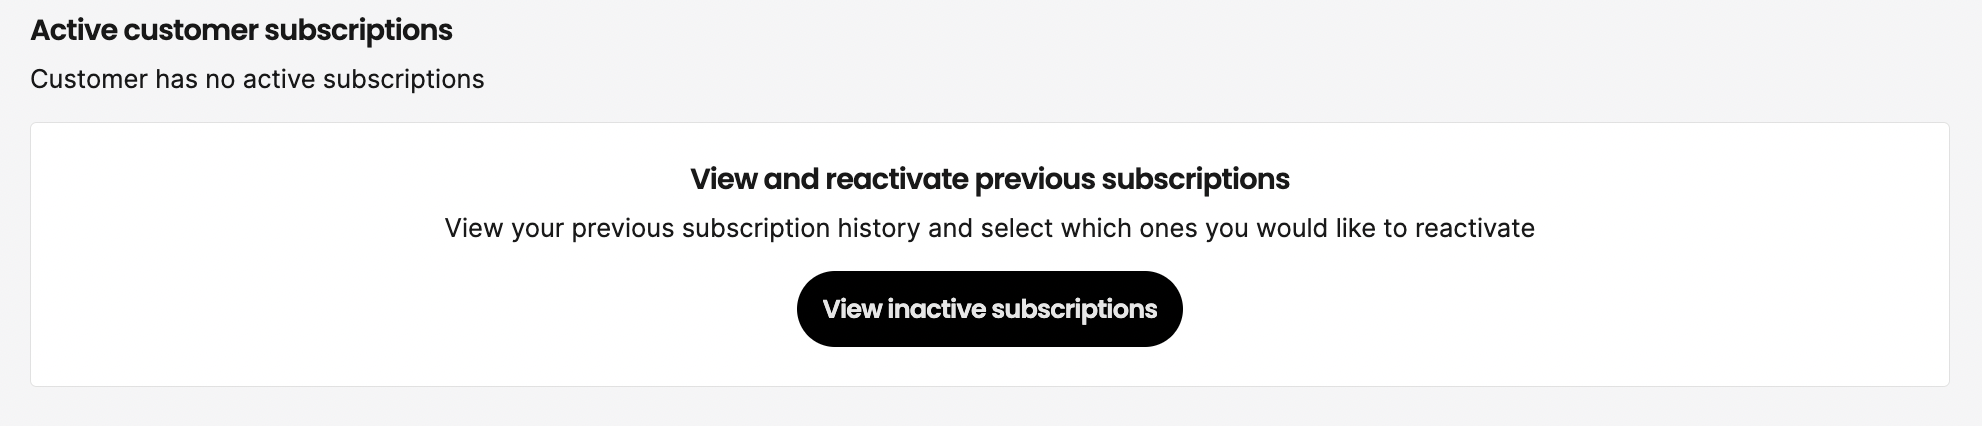 View inactive subscriptions